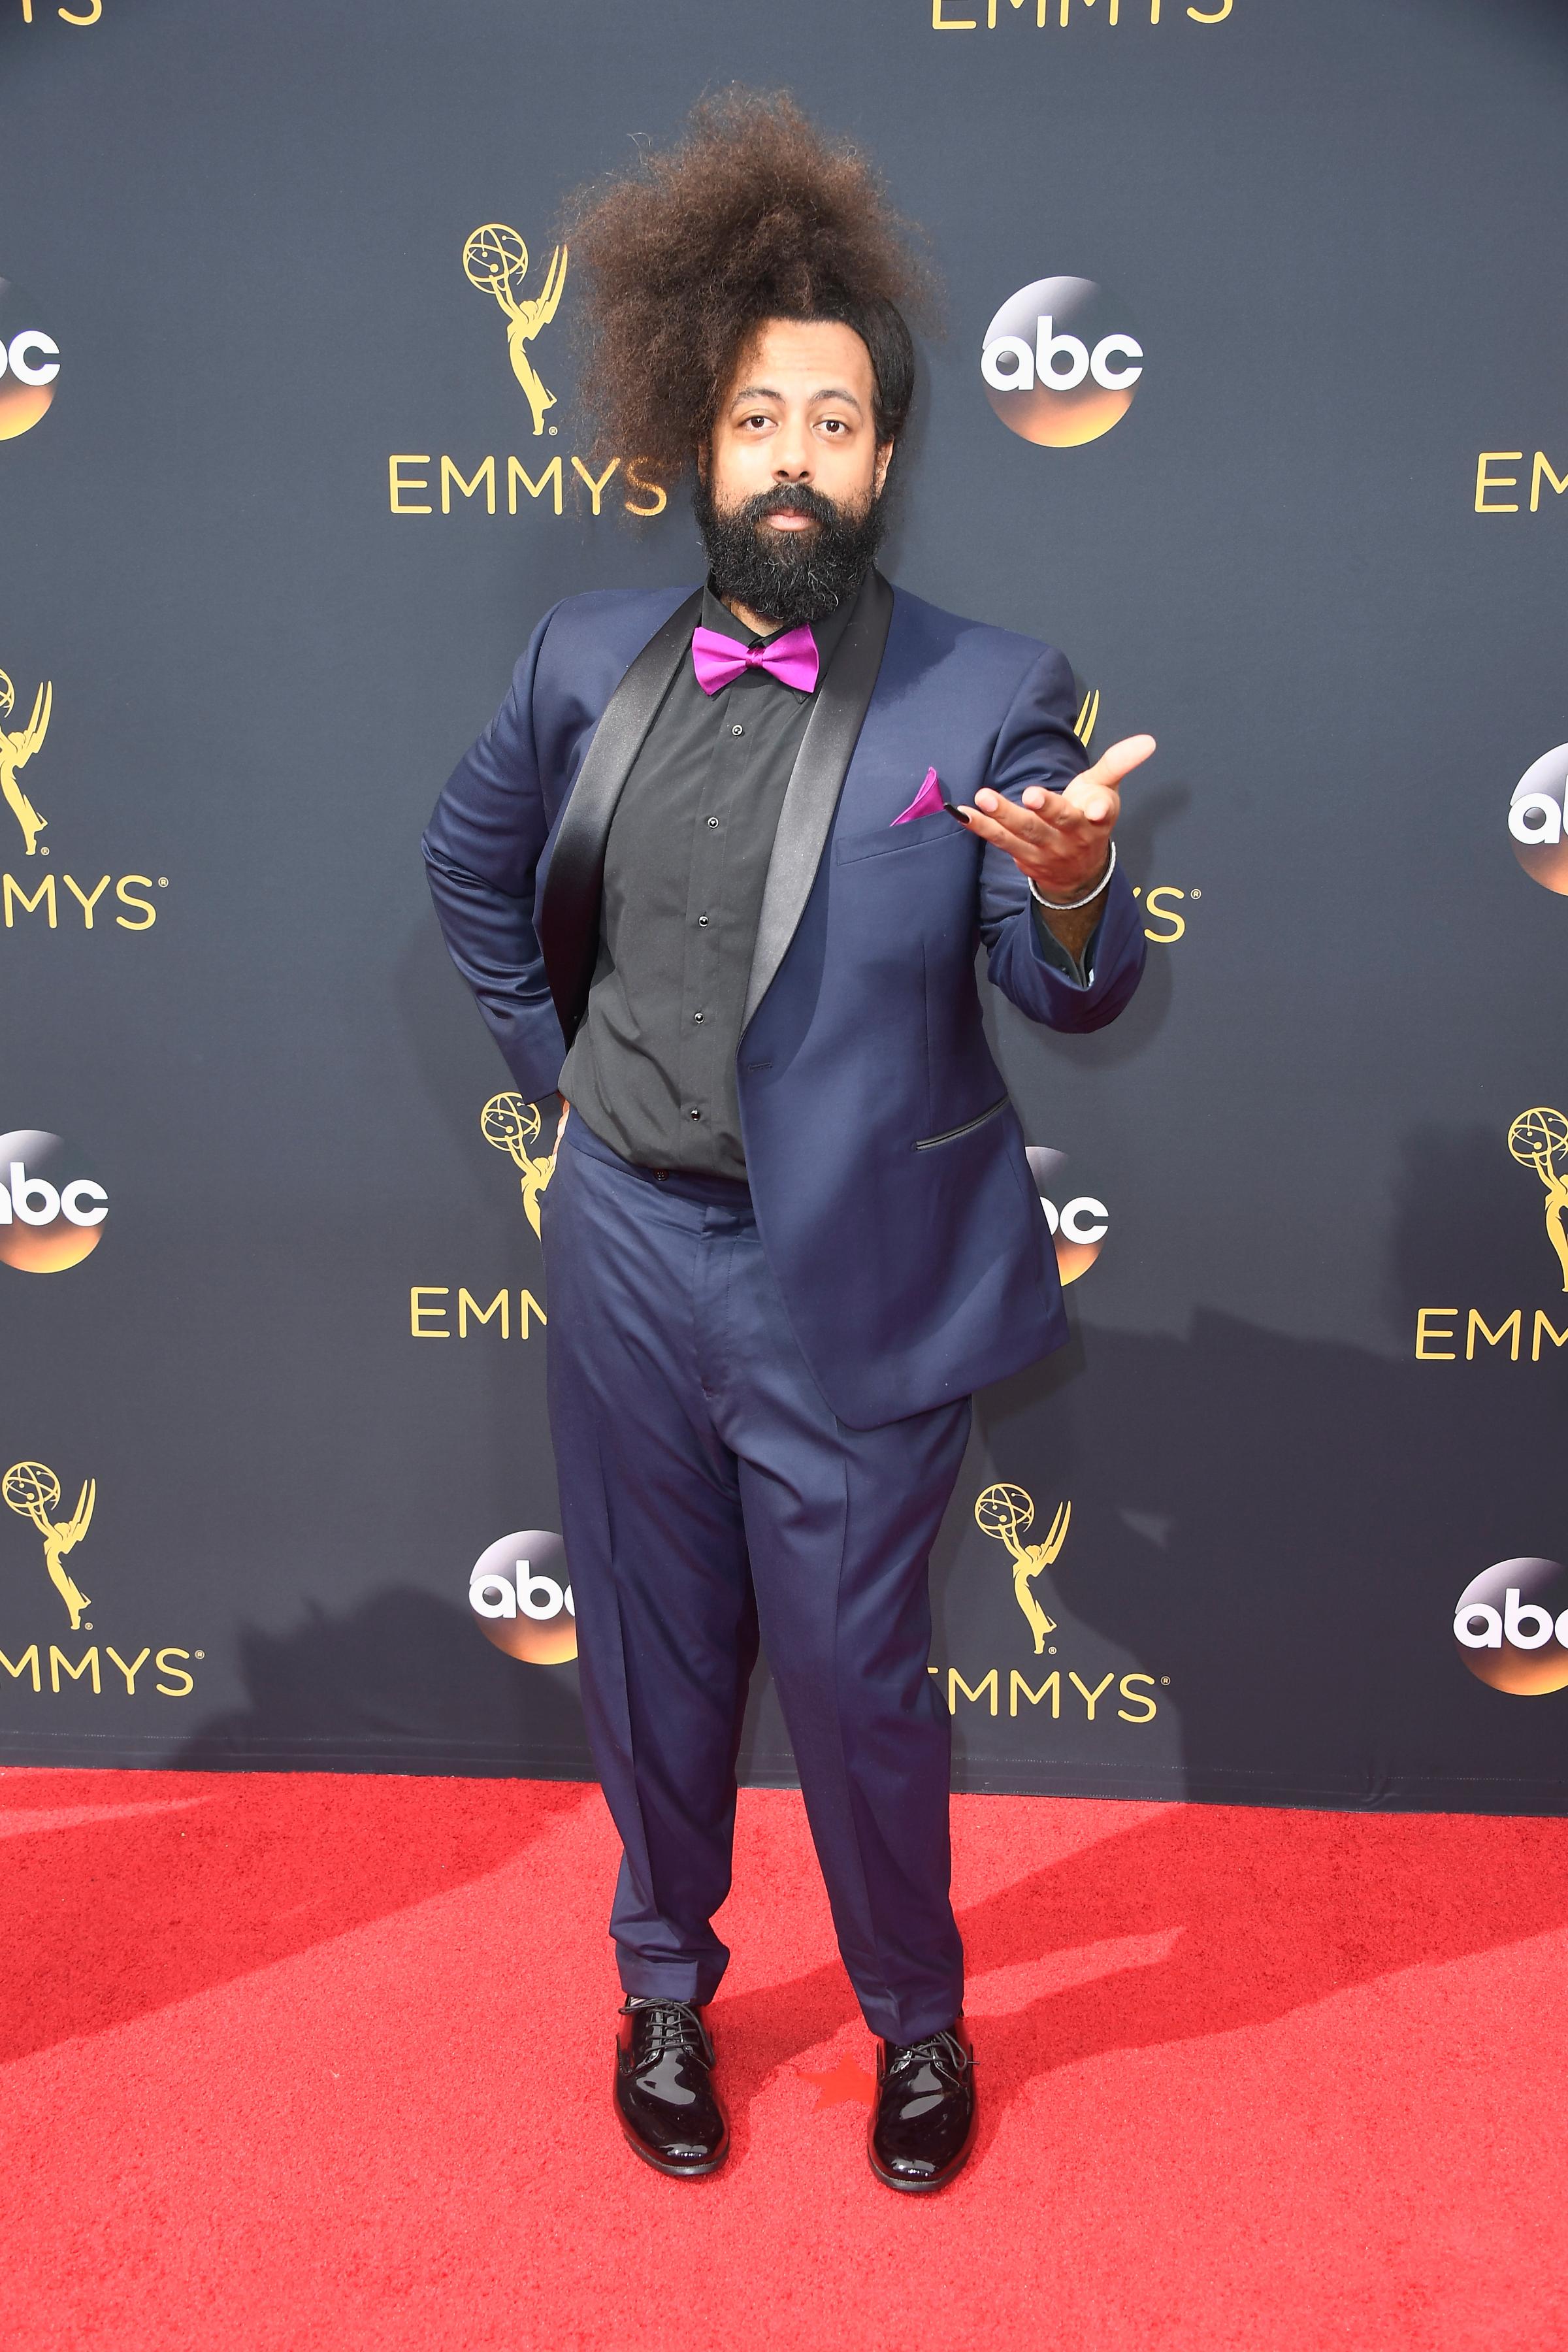 Reggie Watts arrives at the 68th Annual Primetime Emmy Awards at Microsoft Theater on September 18, 2016 in Los Angeles.